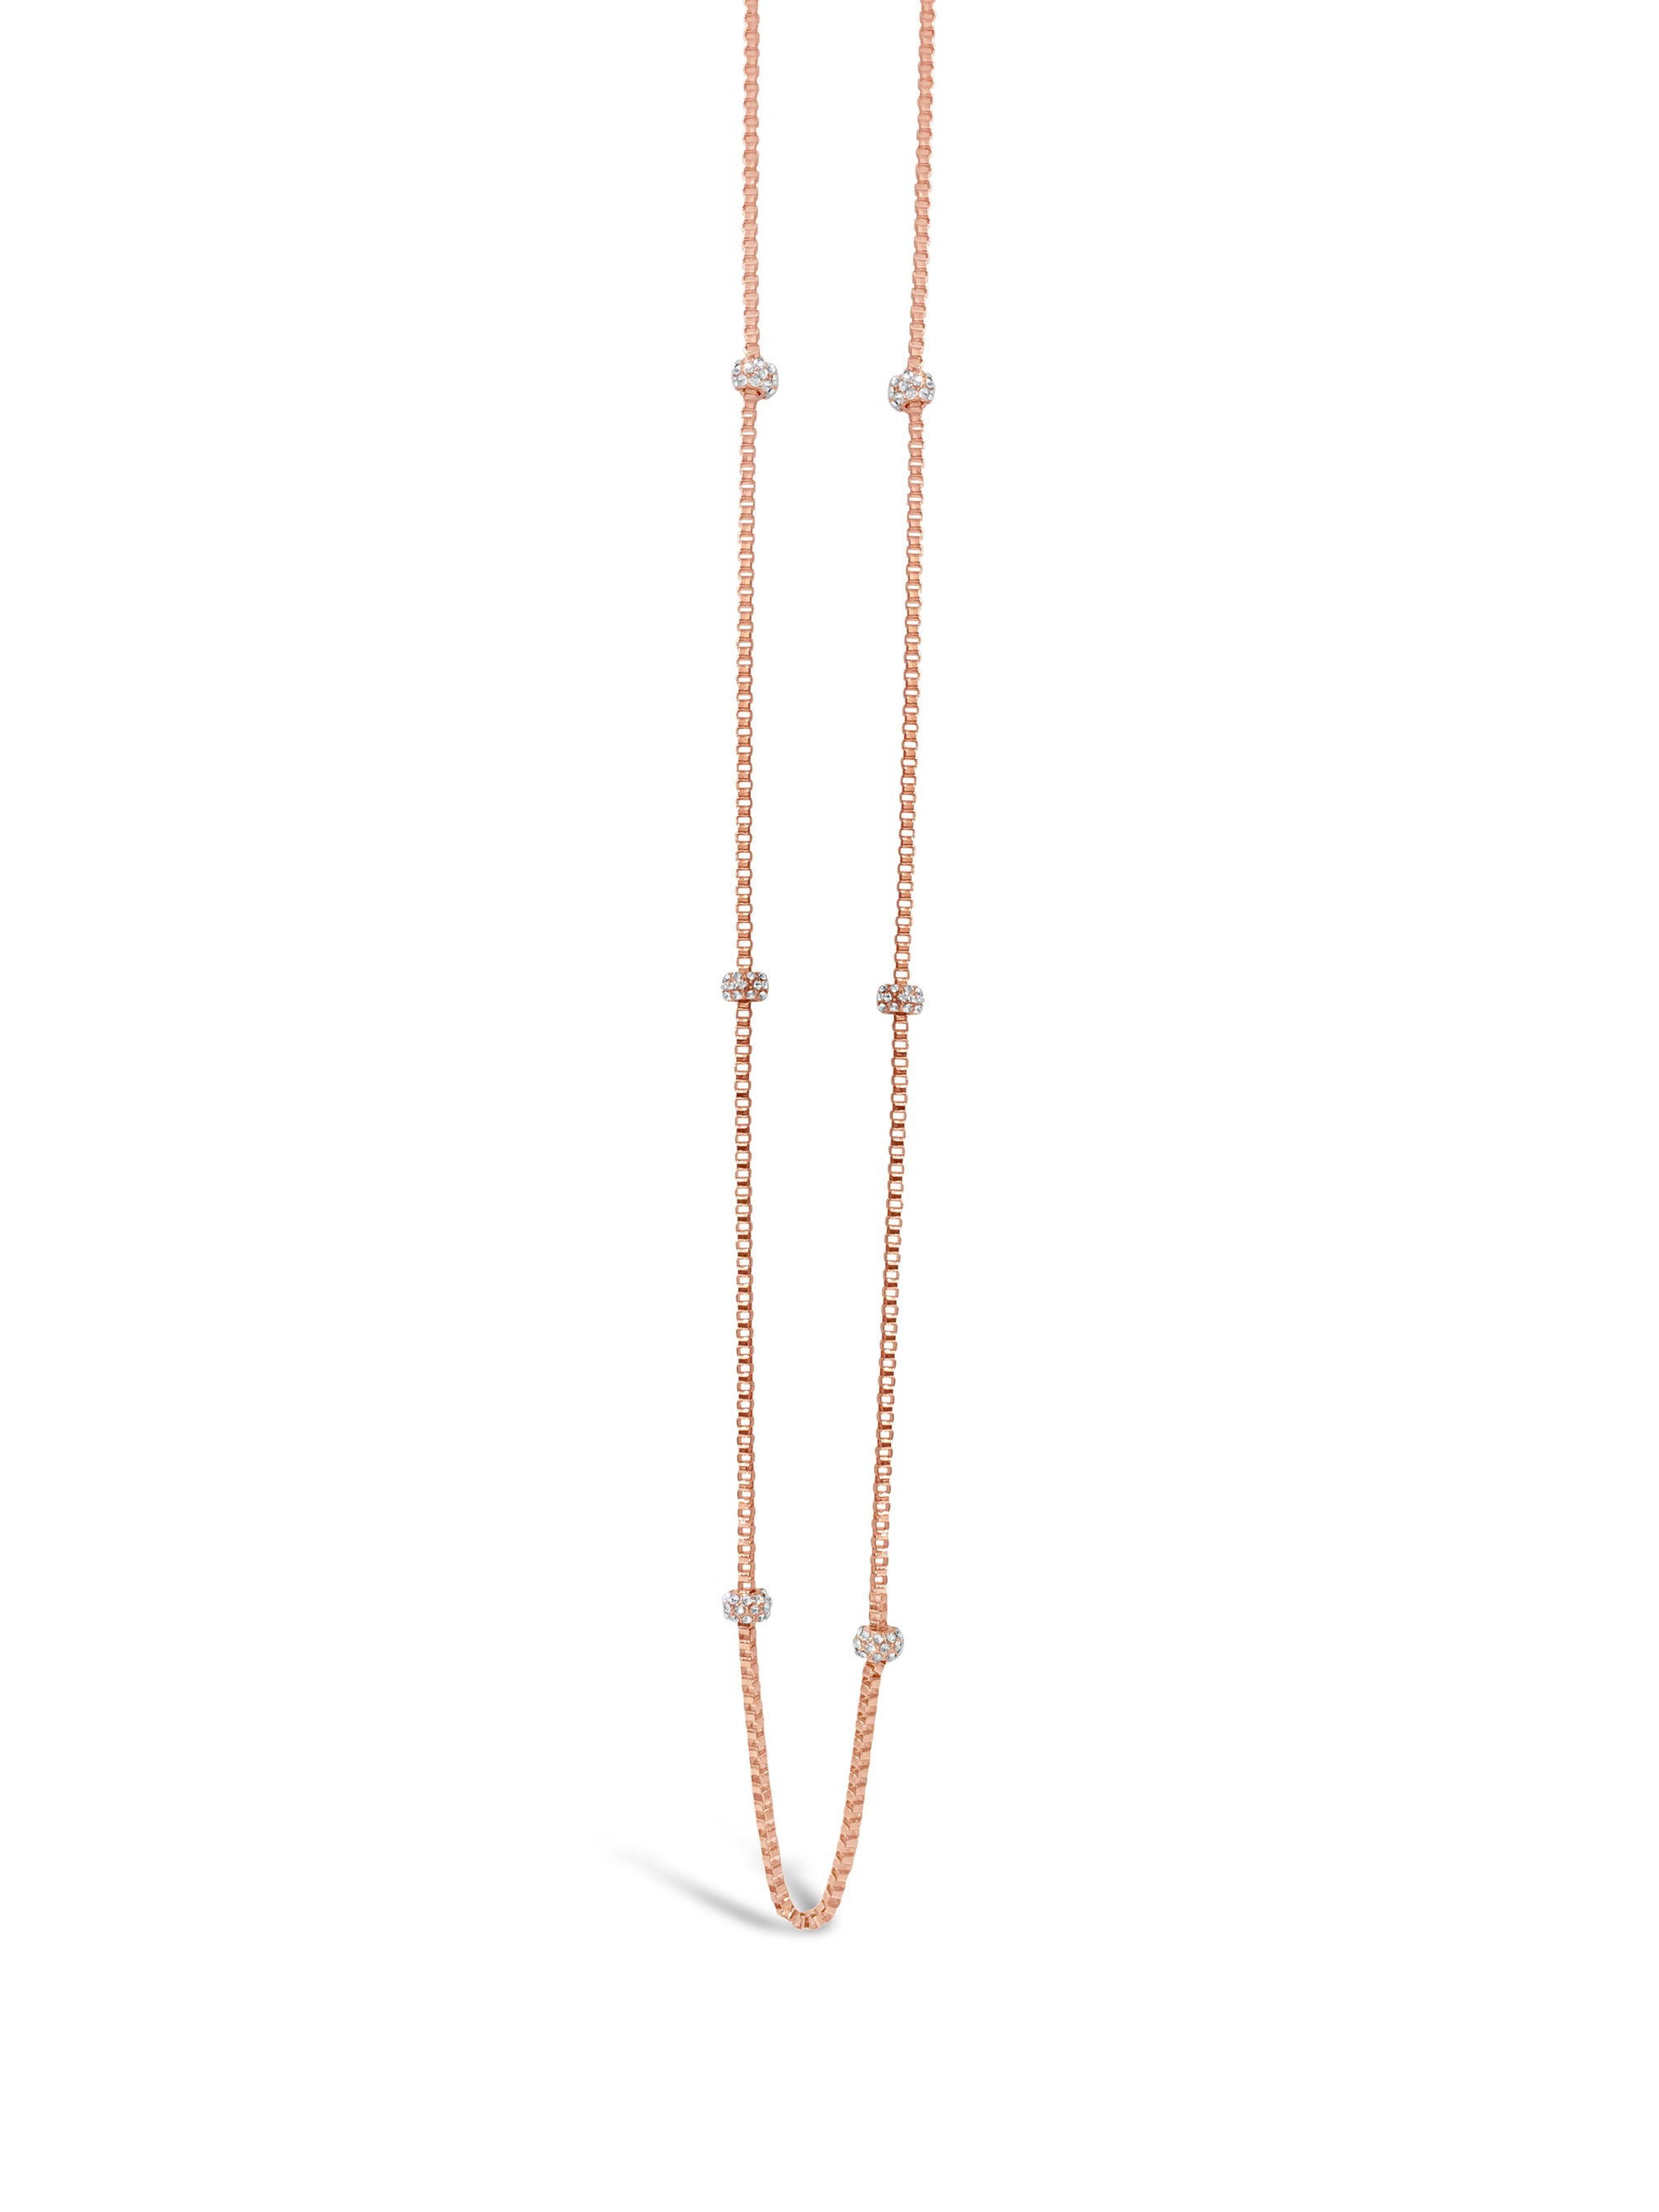 Absolute Jewellery Necklace Rose Gold 40"